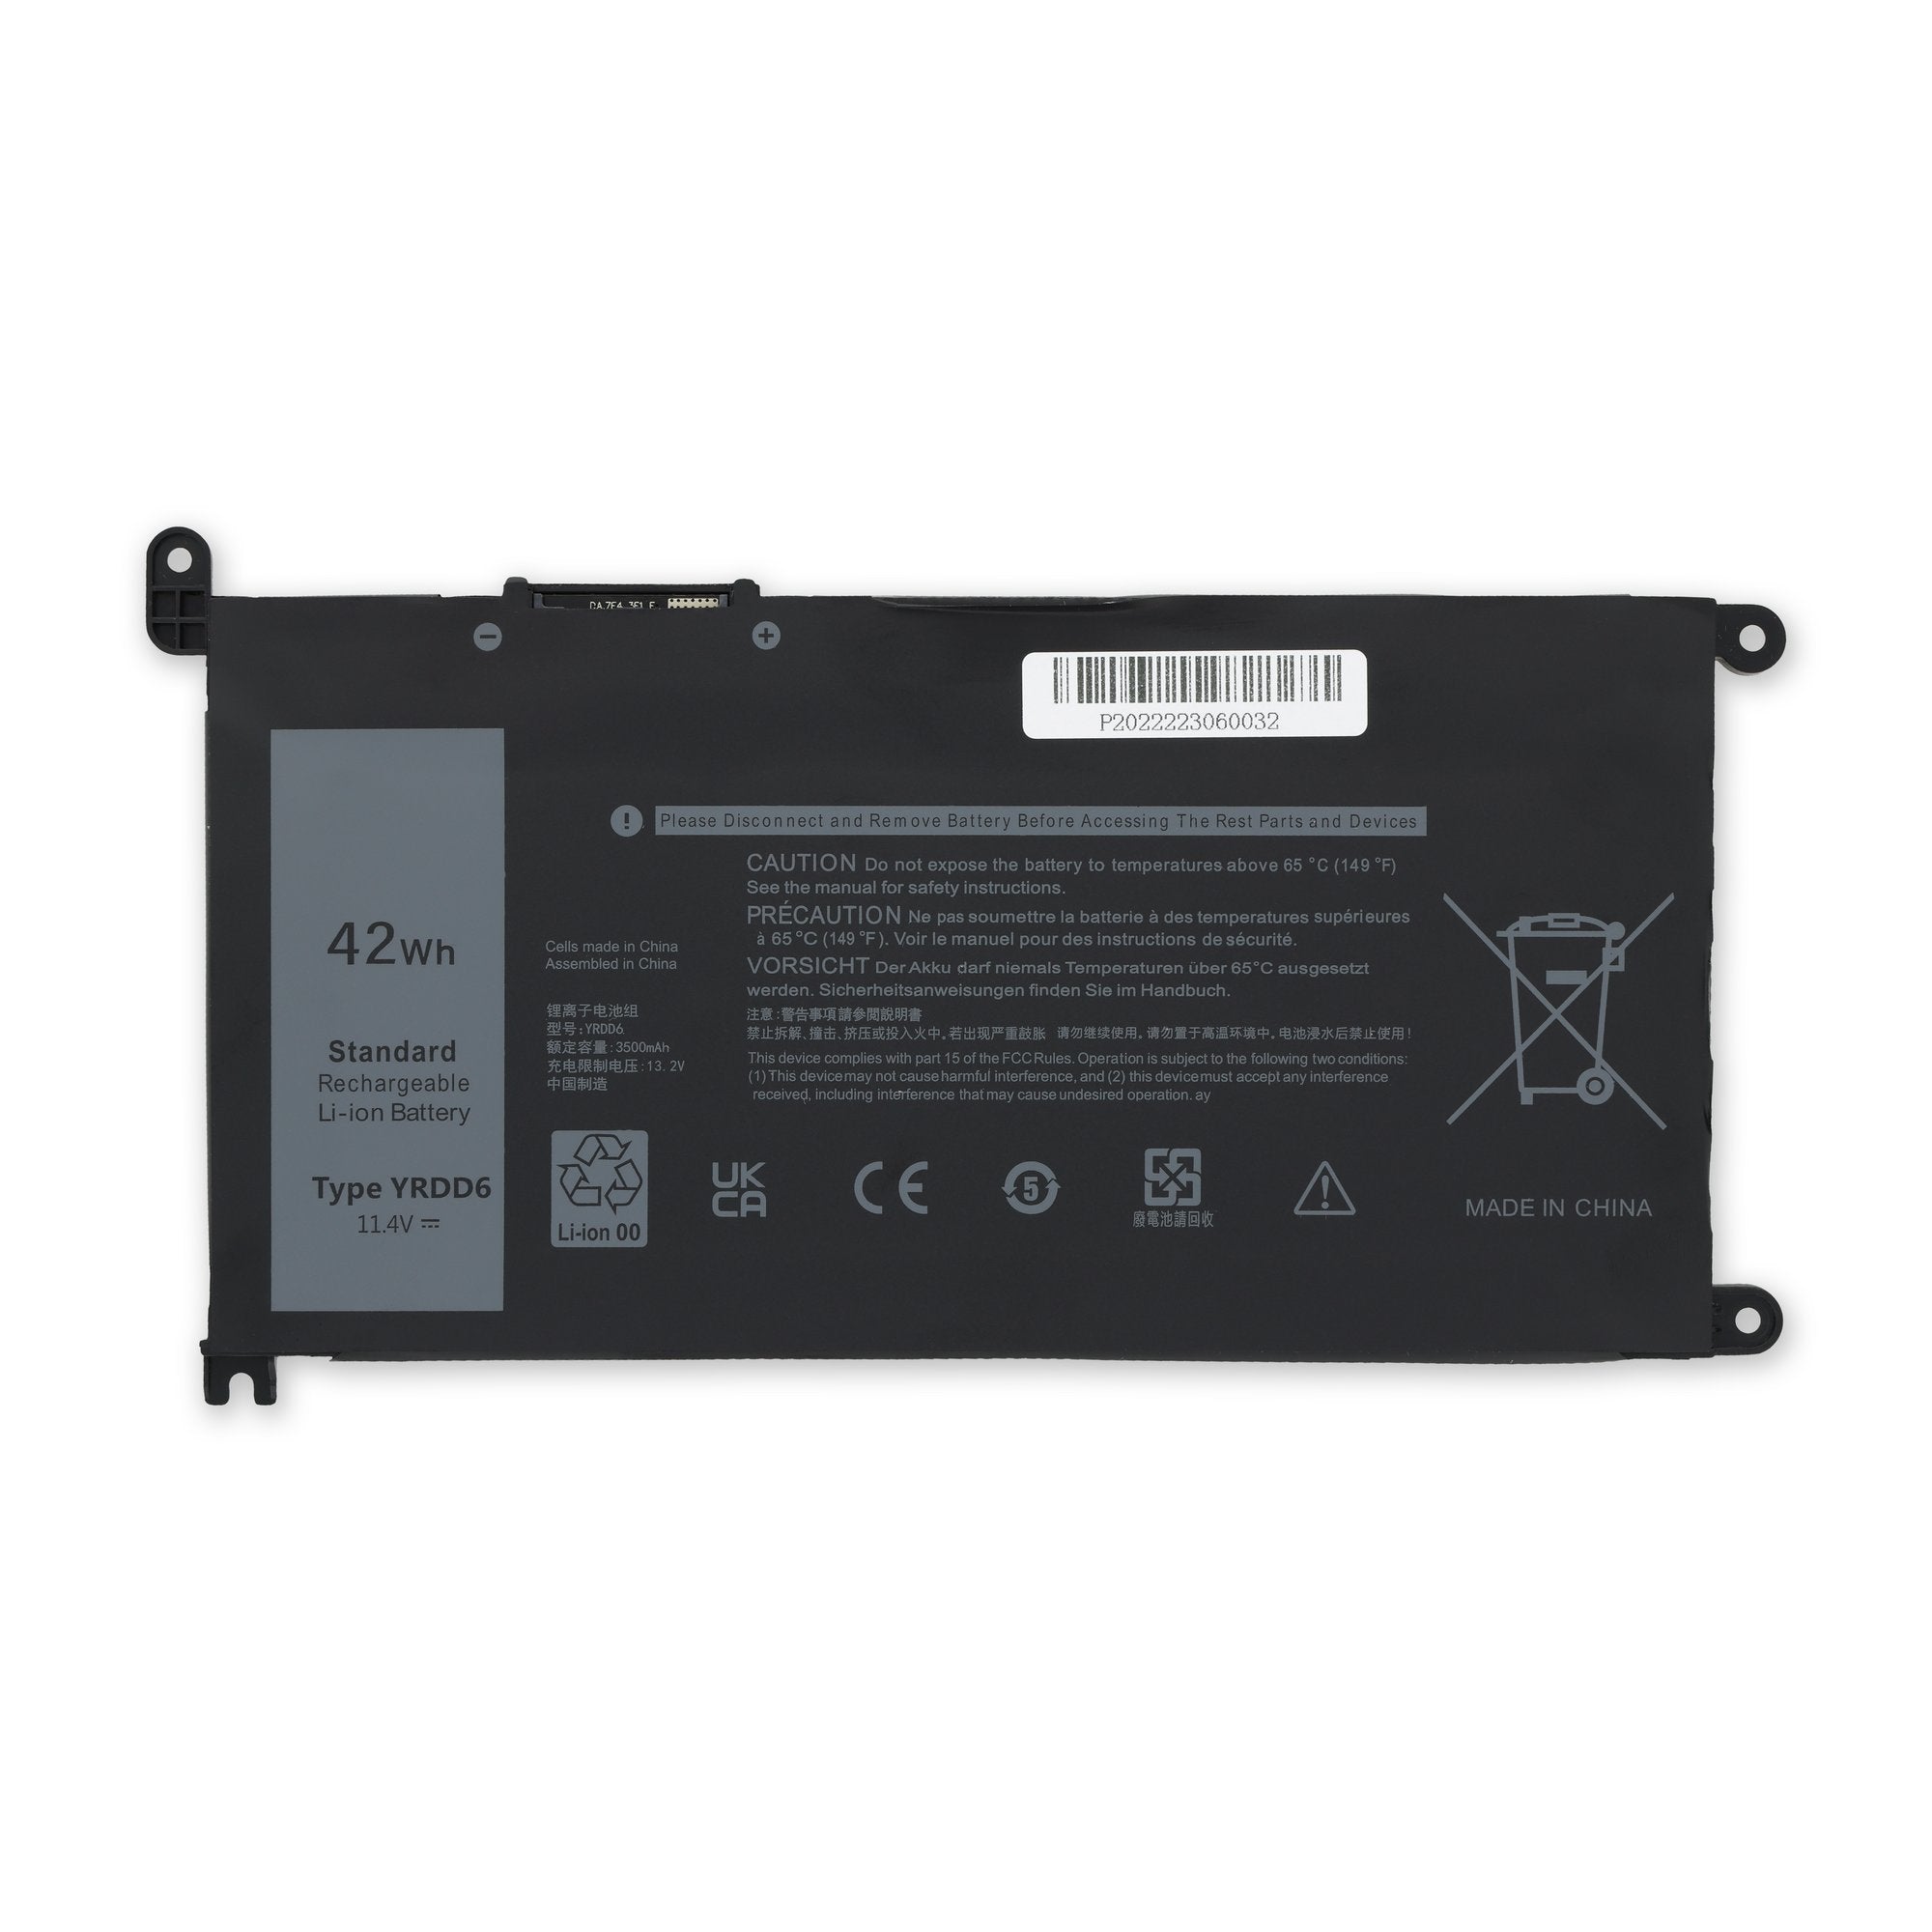 Dell YRDD6 Laptop Battery New Part Only